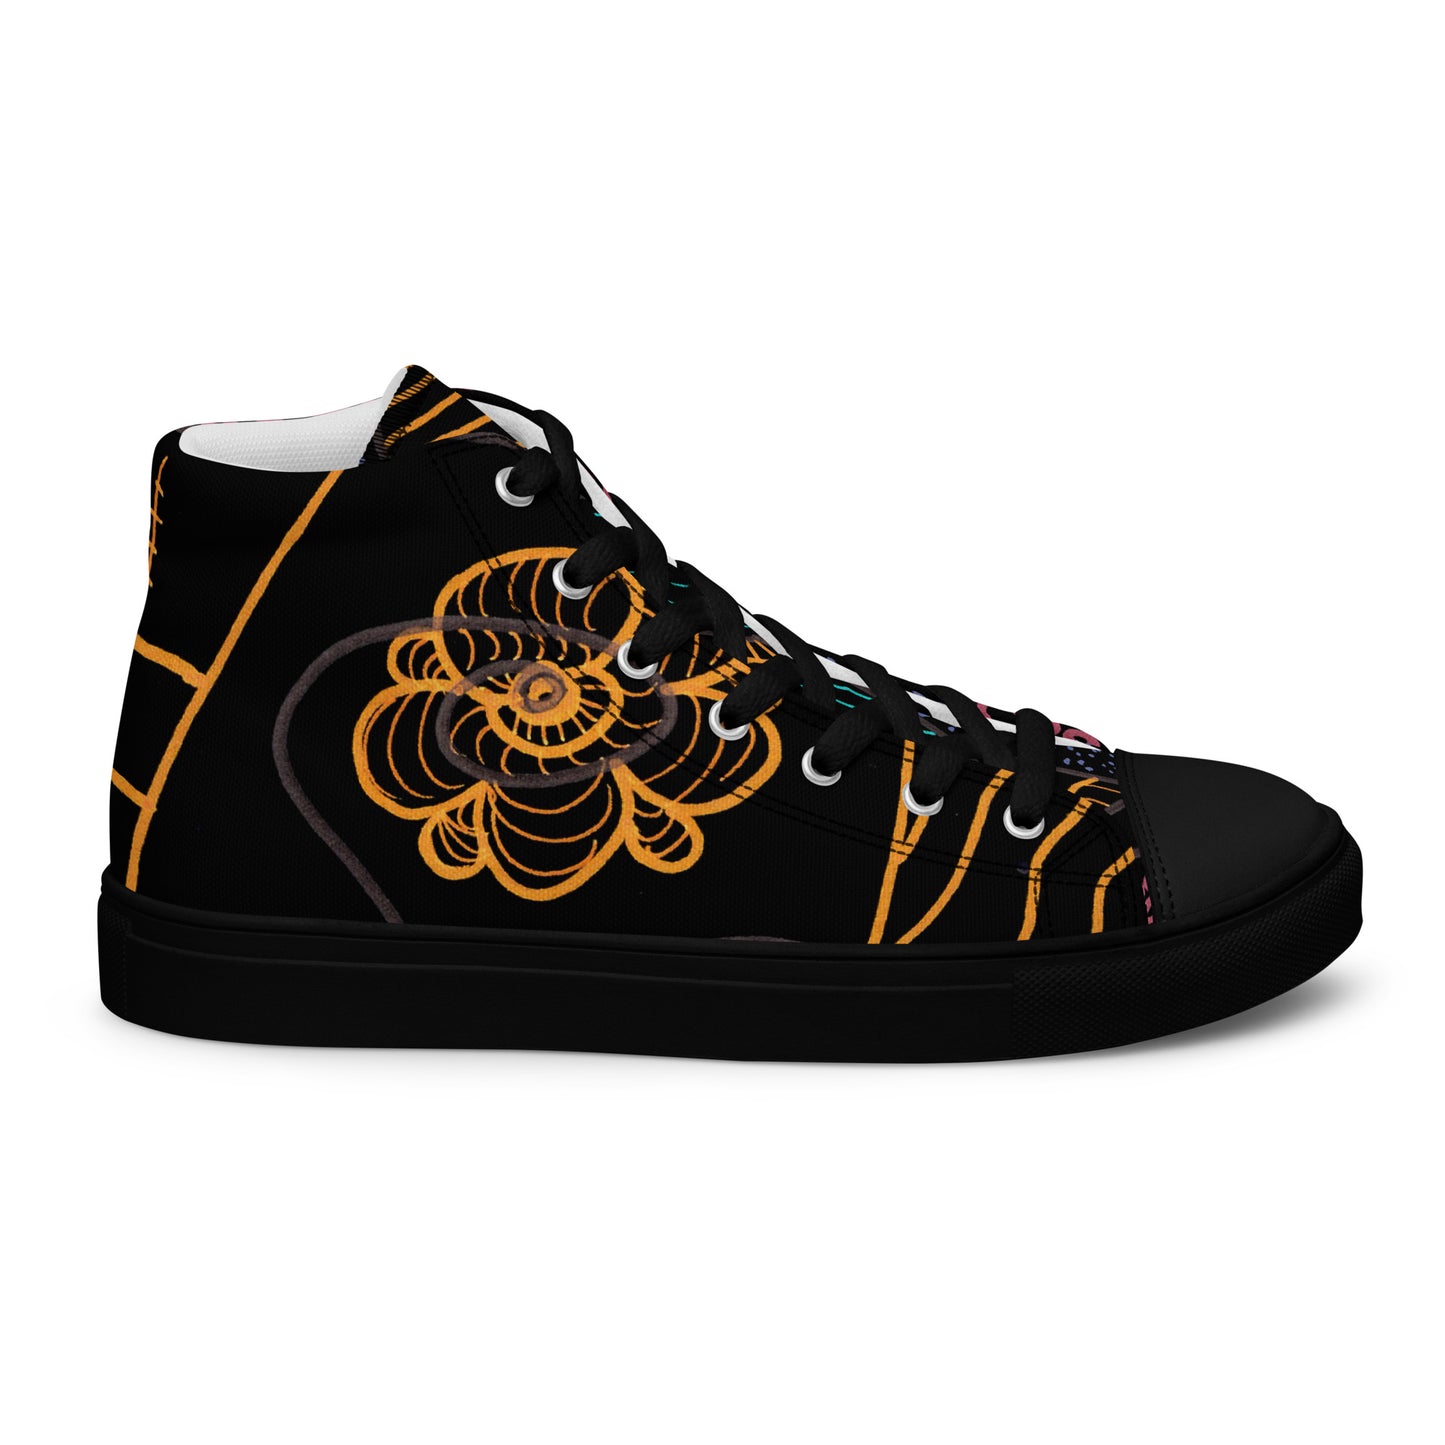 Men’s INVERTED "Some Jazz Schematic" high top canvas shoes